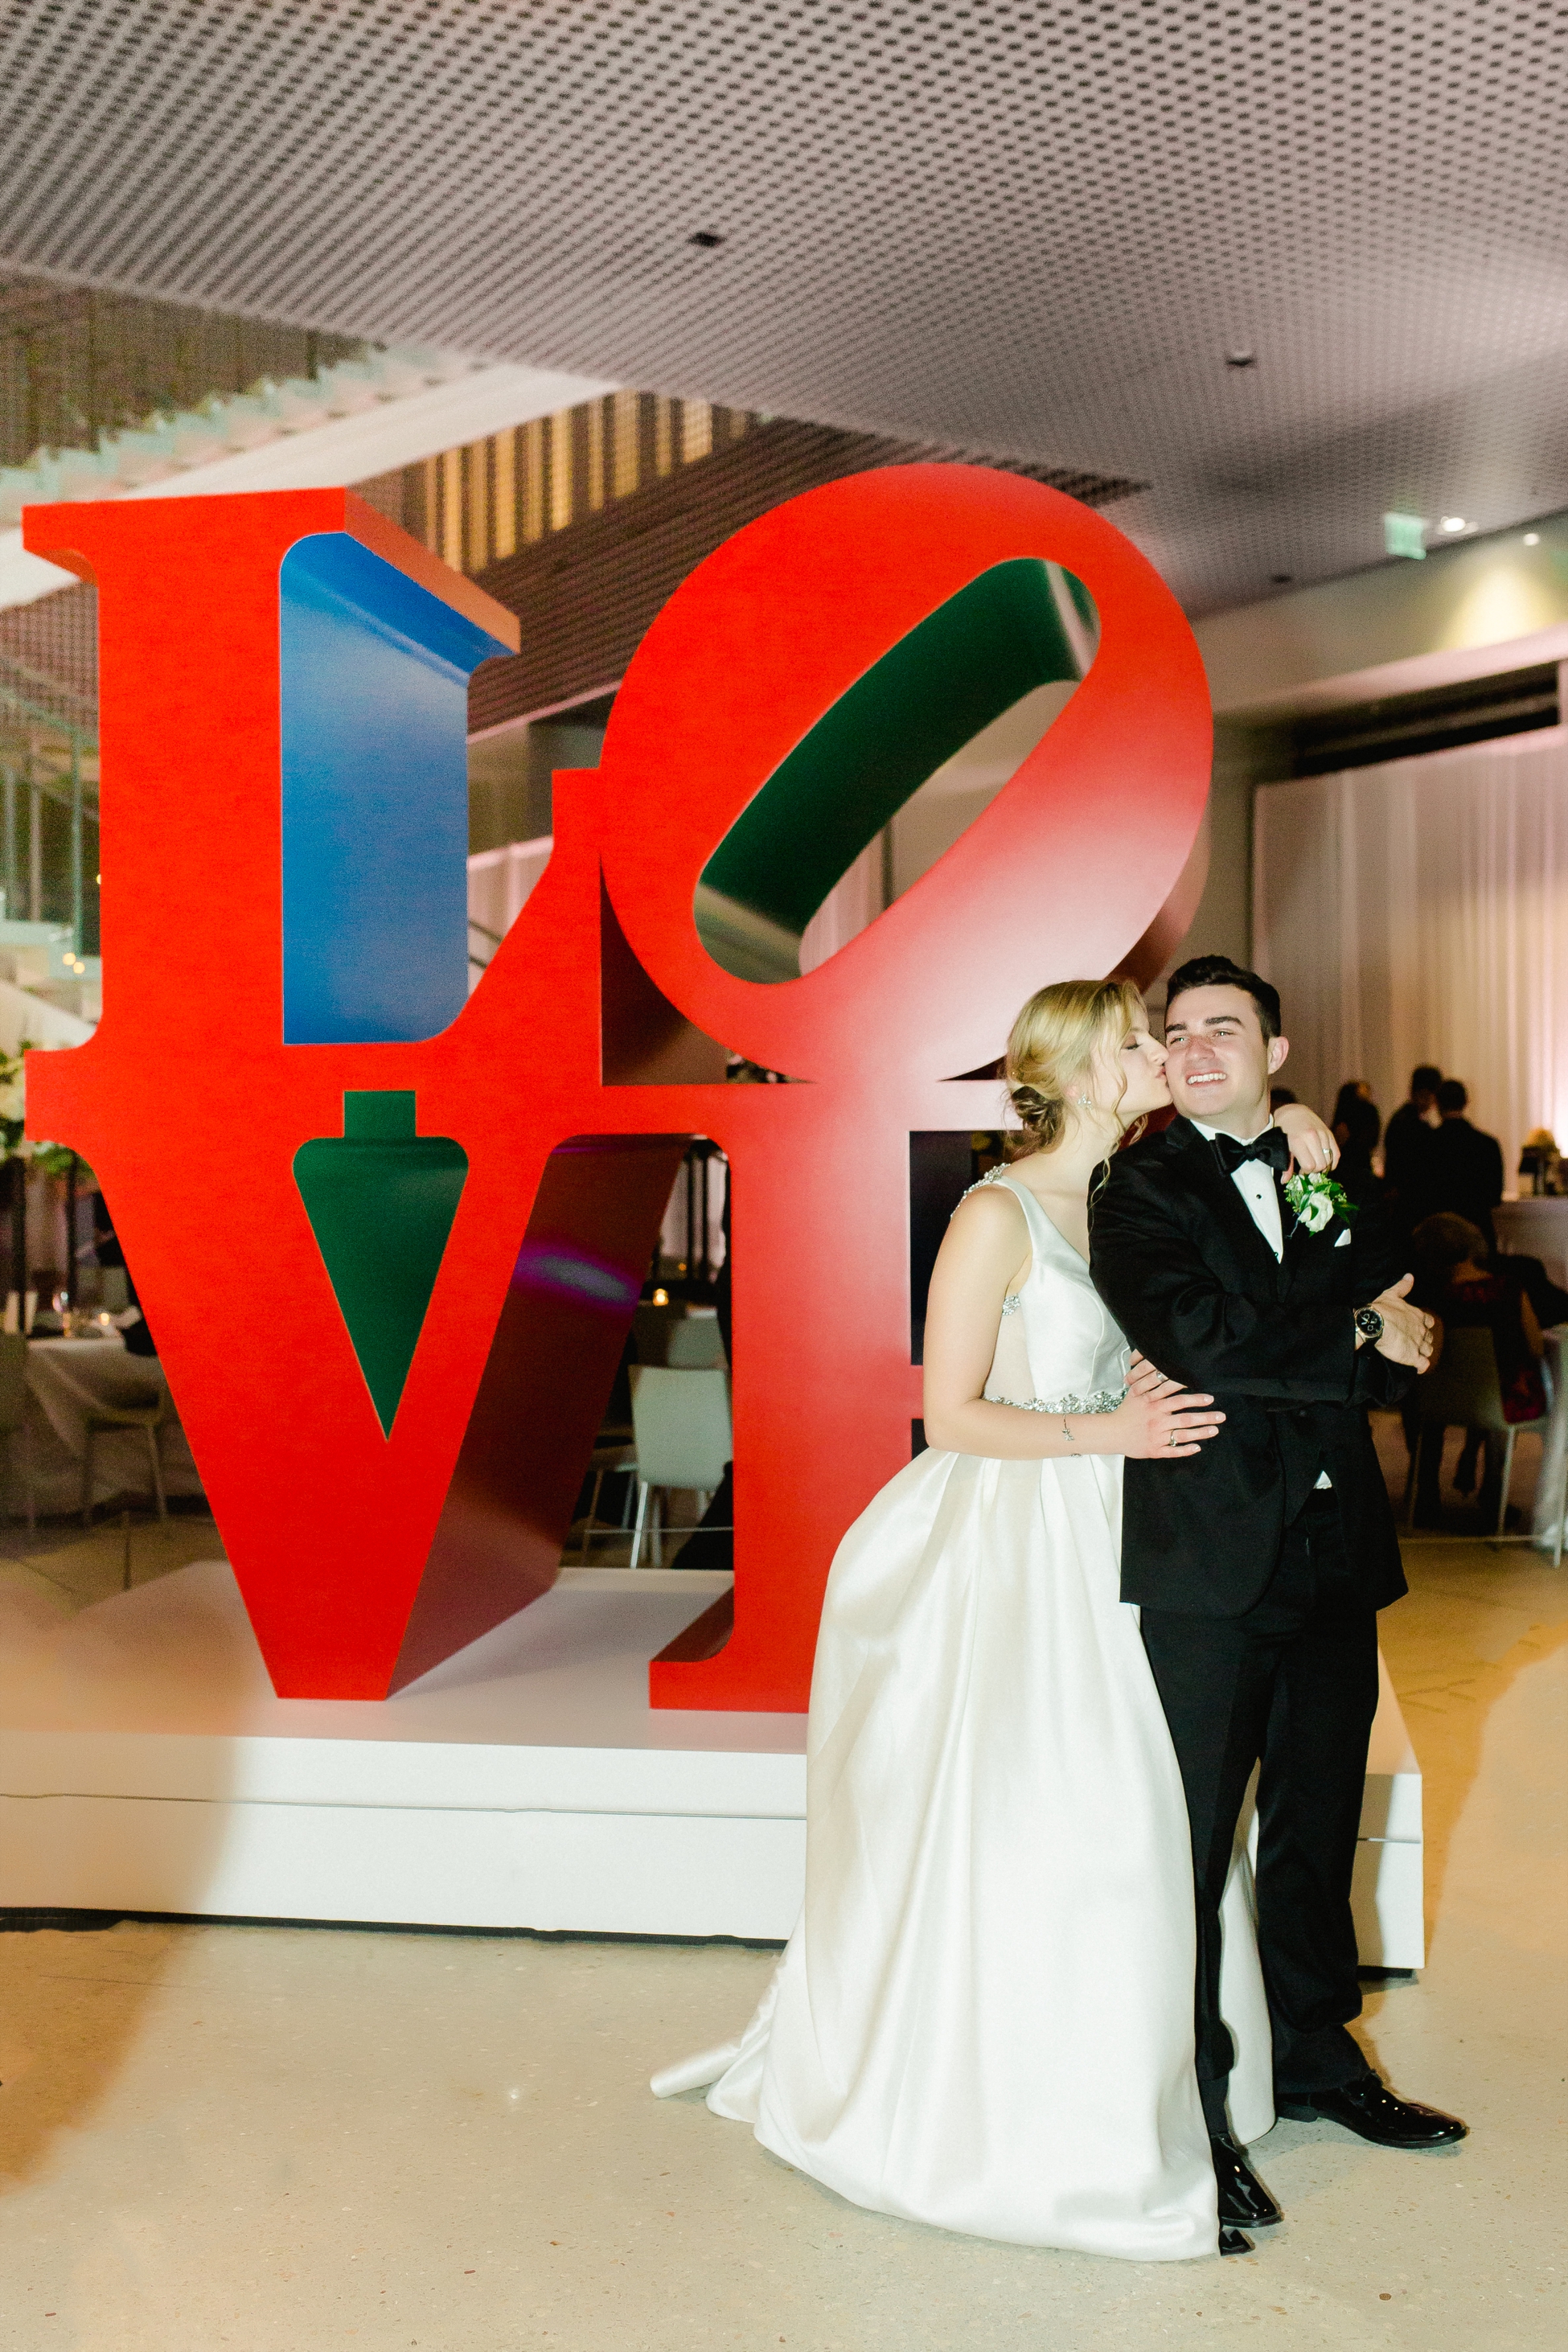 Tampa Museum of Art Wedding | © Ailyn La Torre Photography 2019